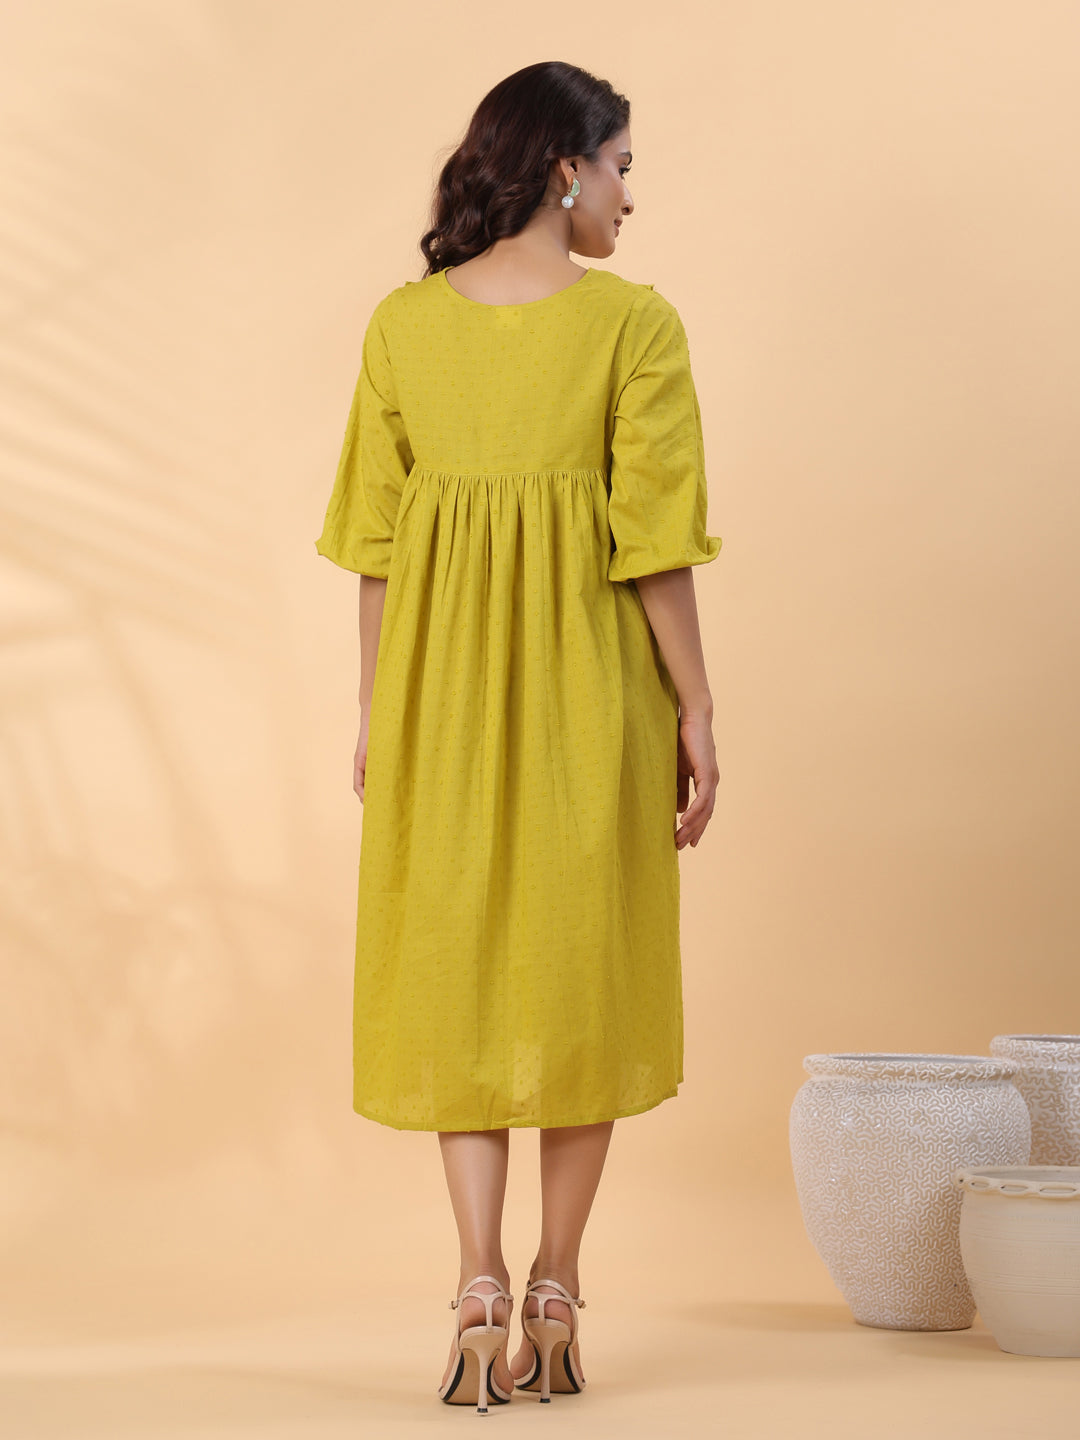 LIme Green Dobby Cotton Pleated Dress